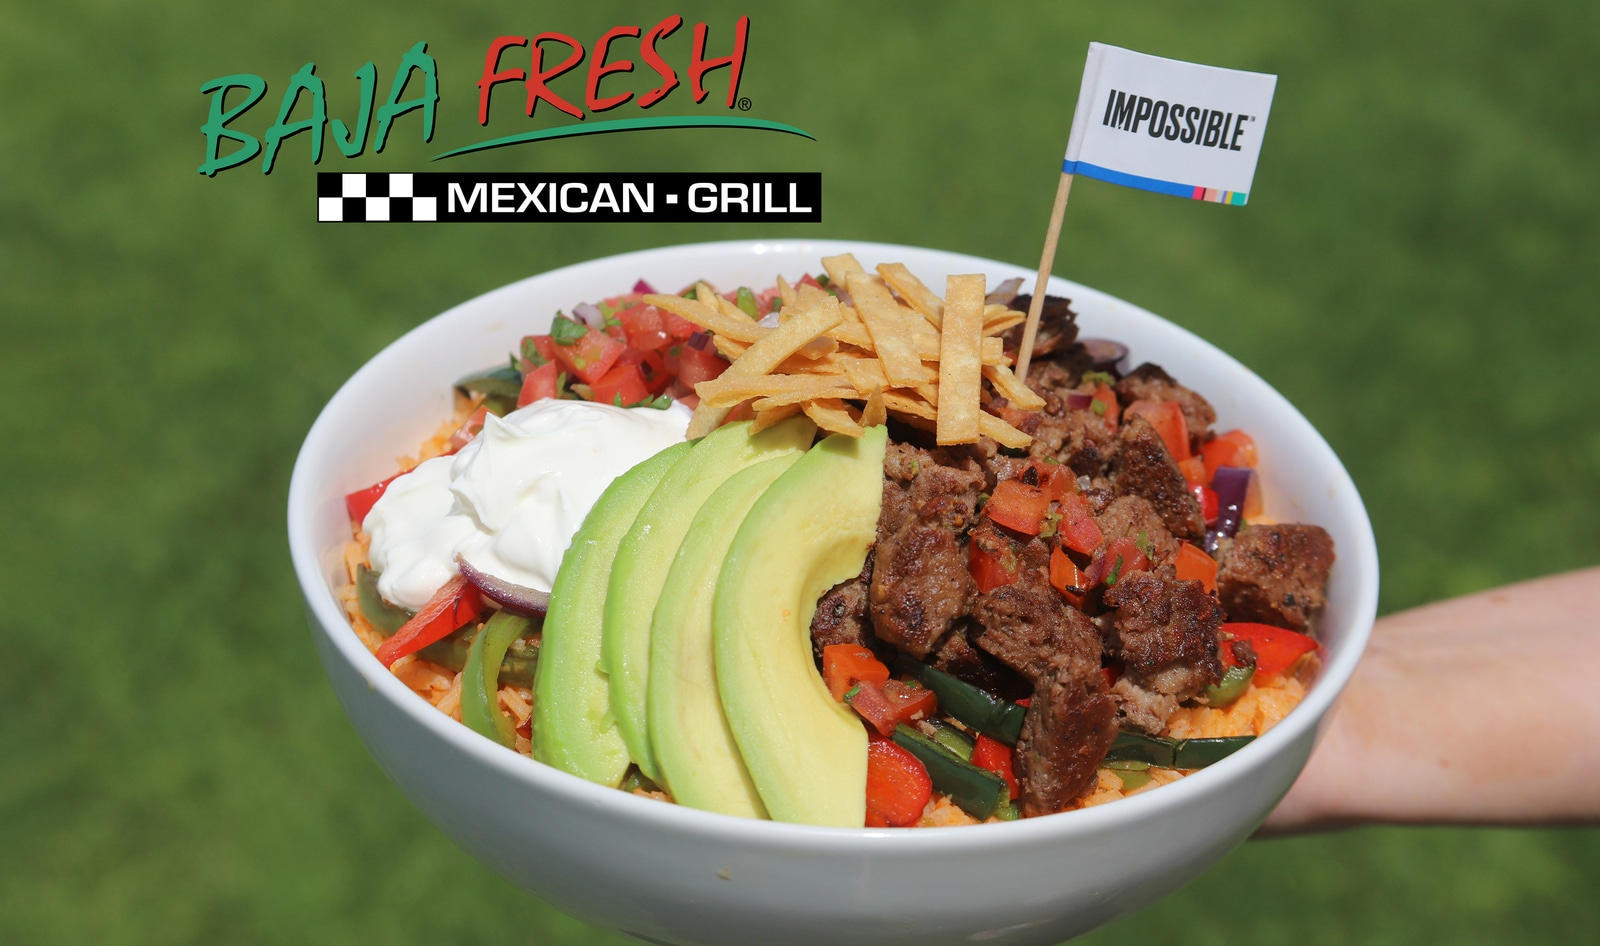 Meatless Impossible Tacos, Burritos, and Bowls Come to 80 Baja Fresh Locations